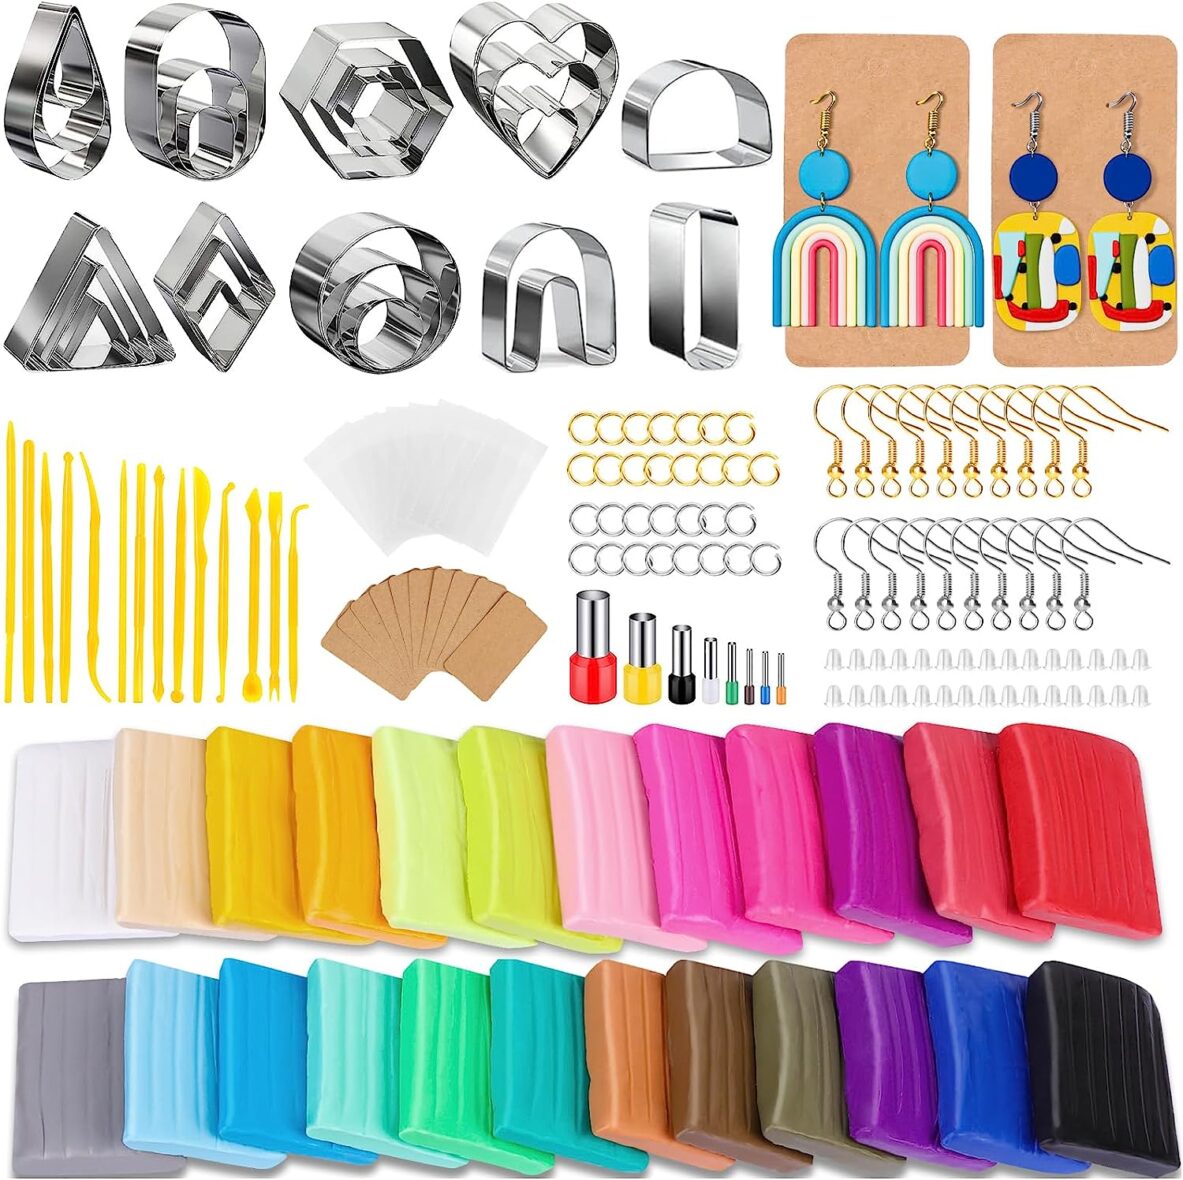 Snoqhill Polymer Clay Earrings Making Kit